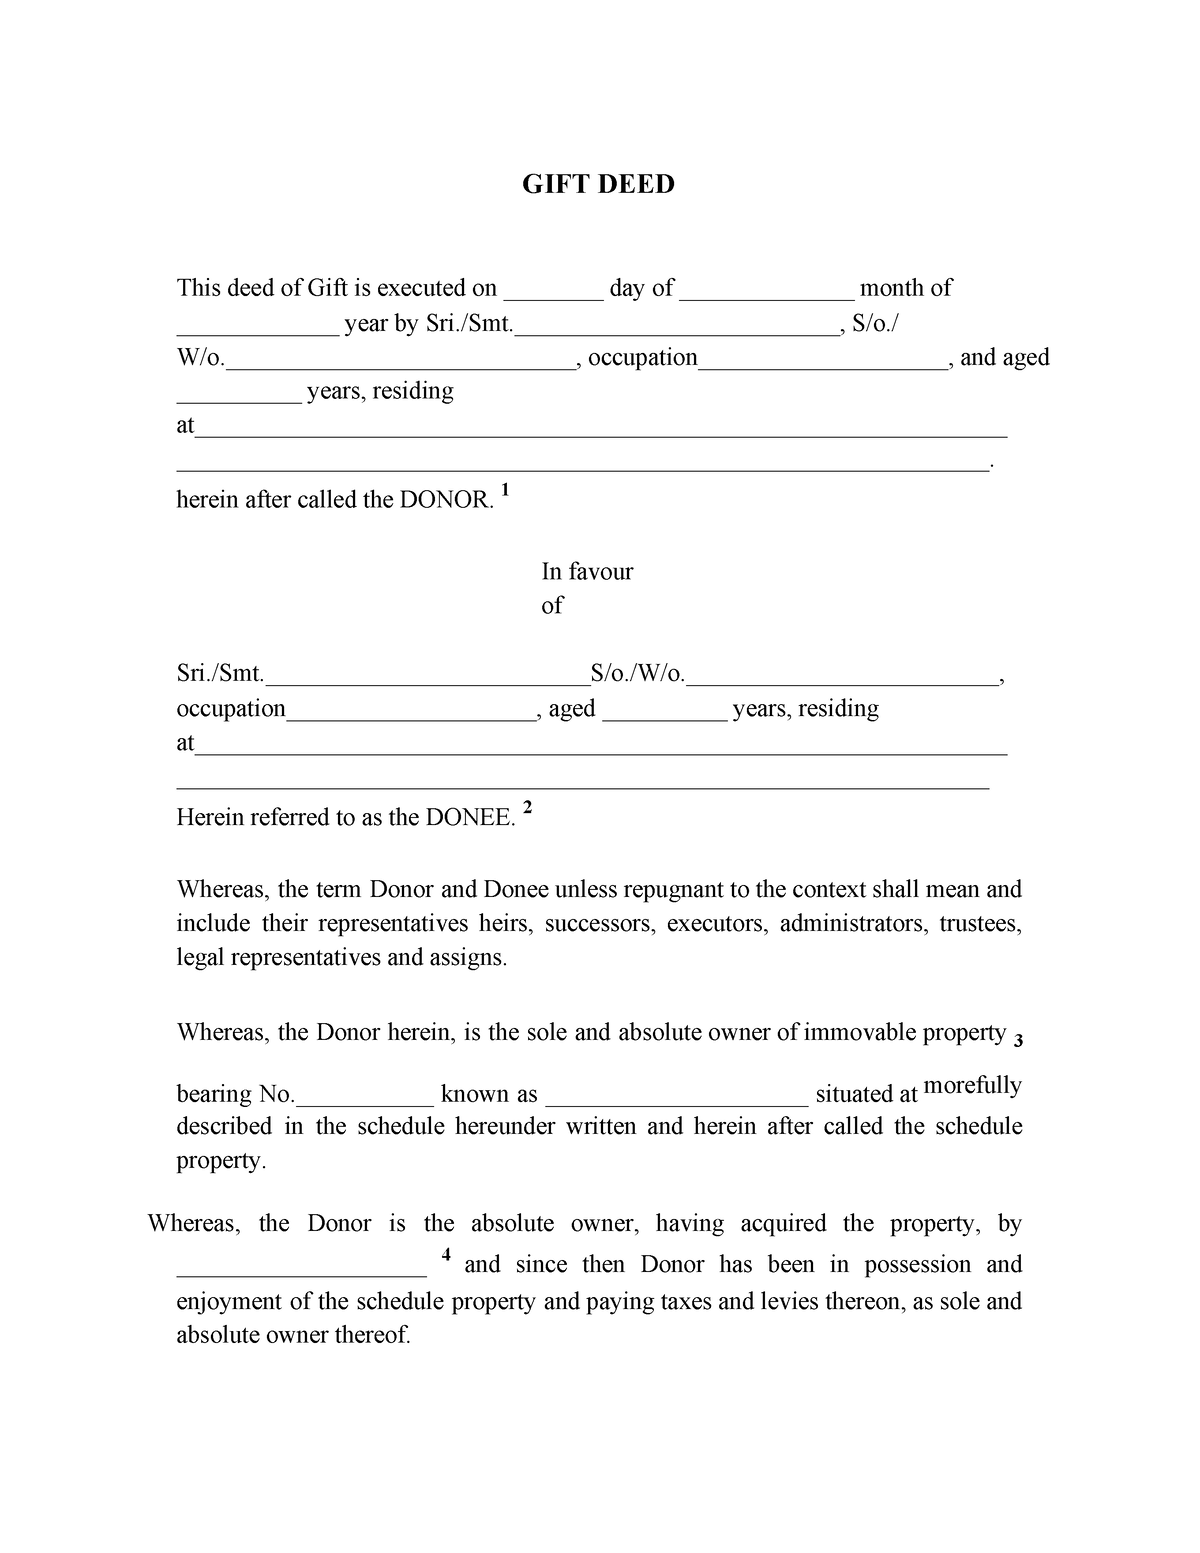 Sample-gift-deed - format of sample gift deed - GIFT DEED This deed of ...